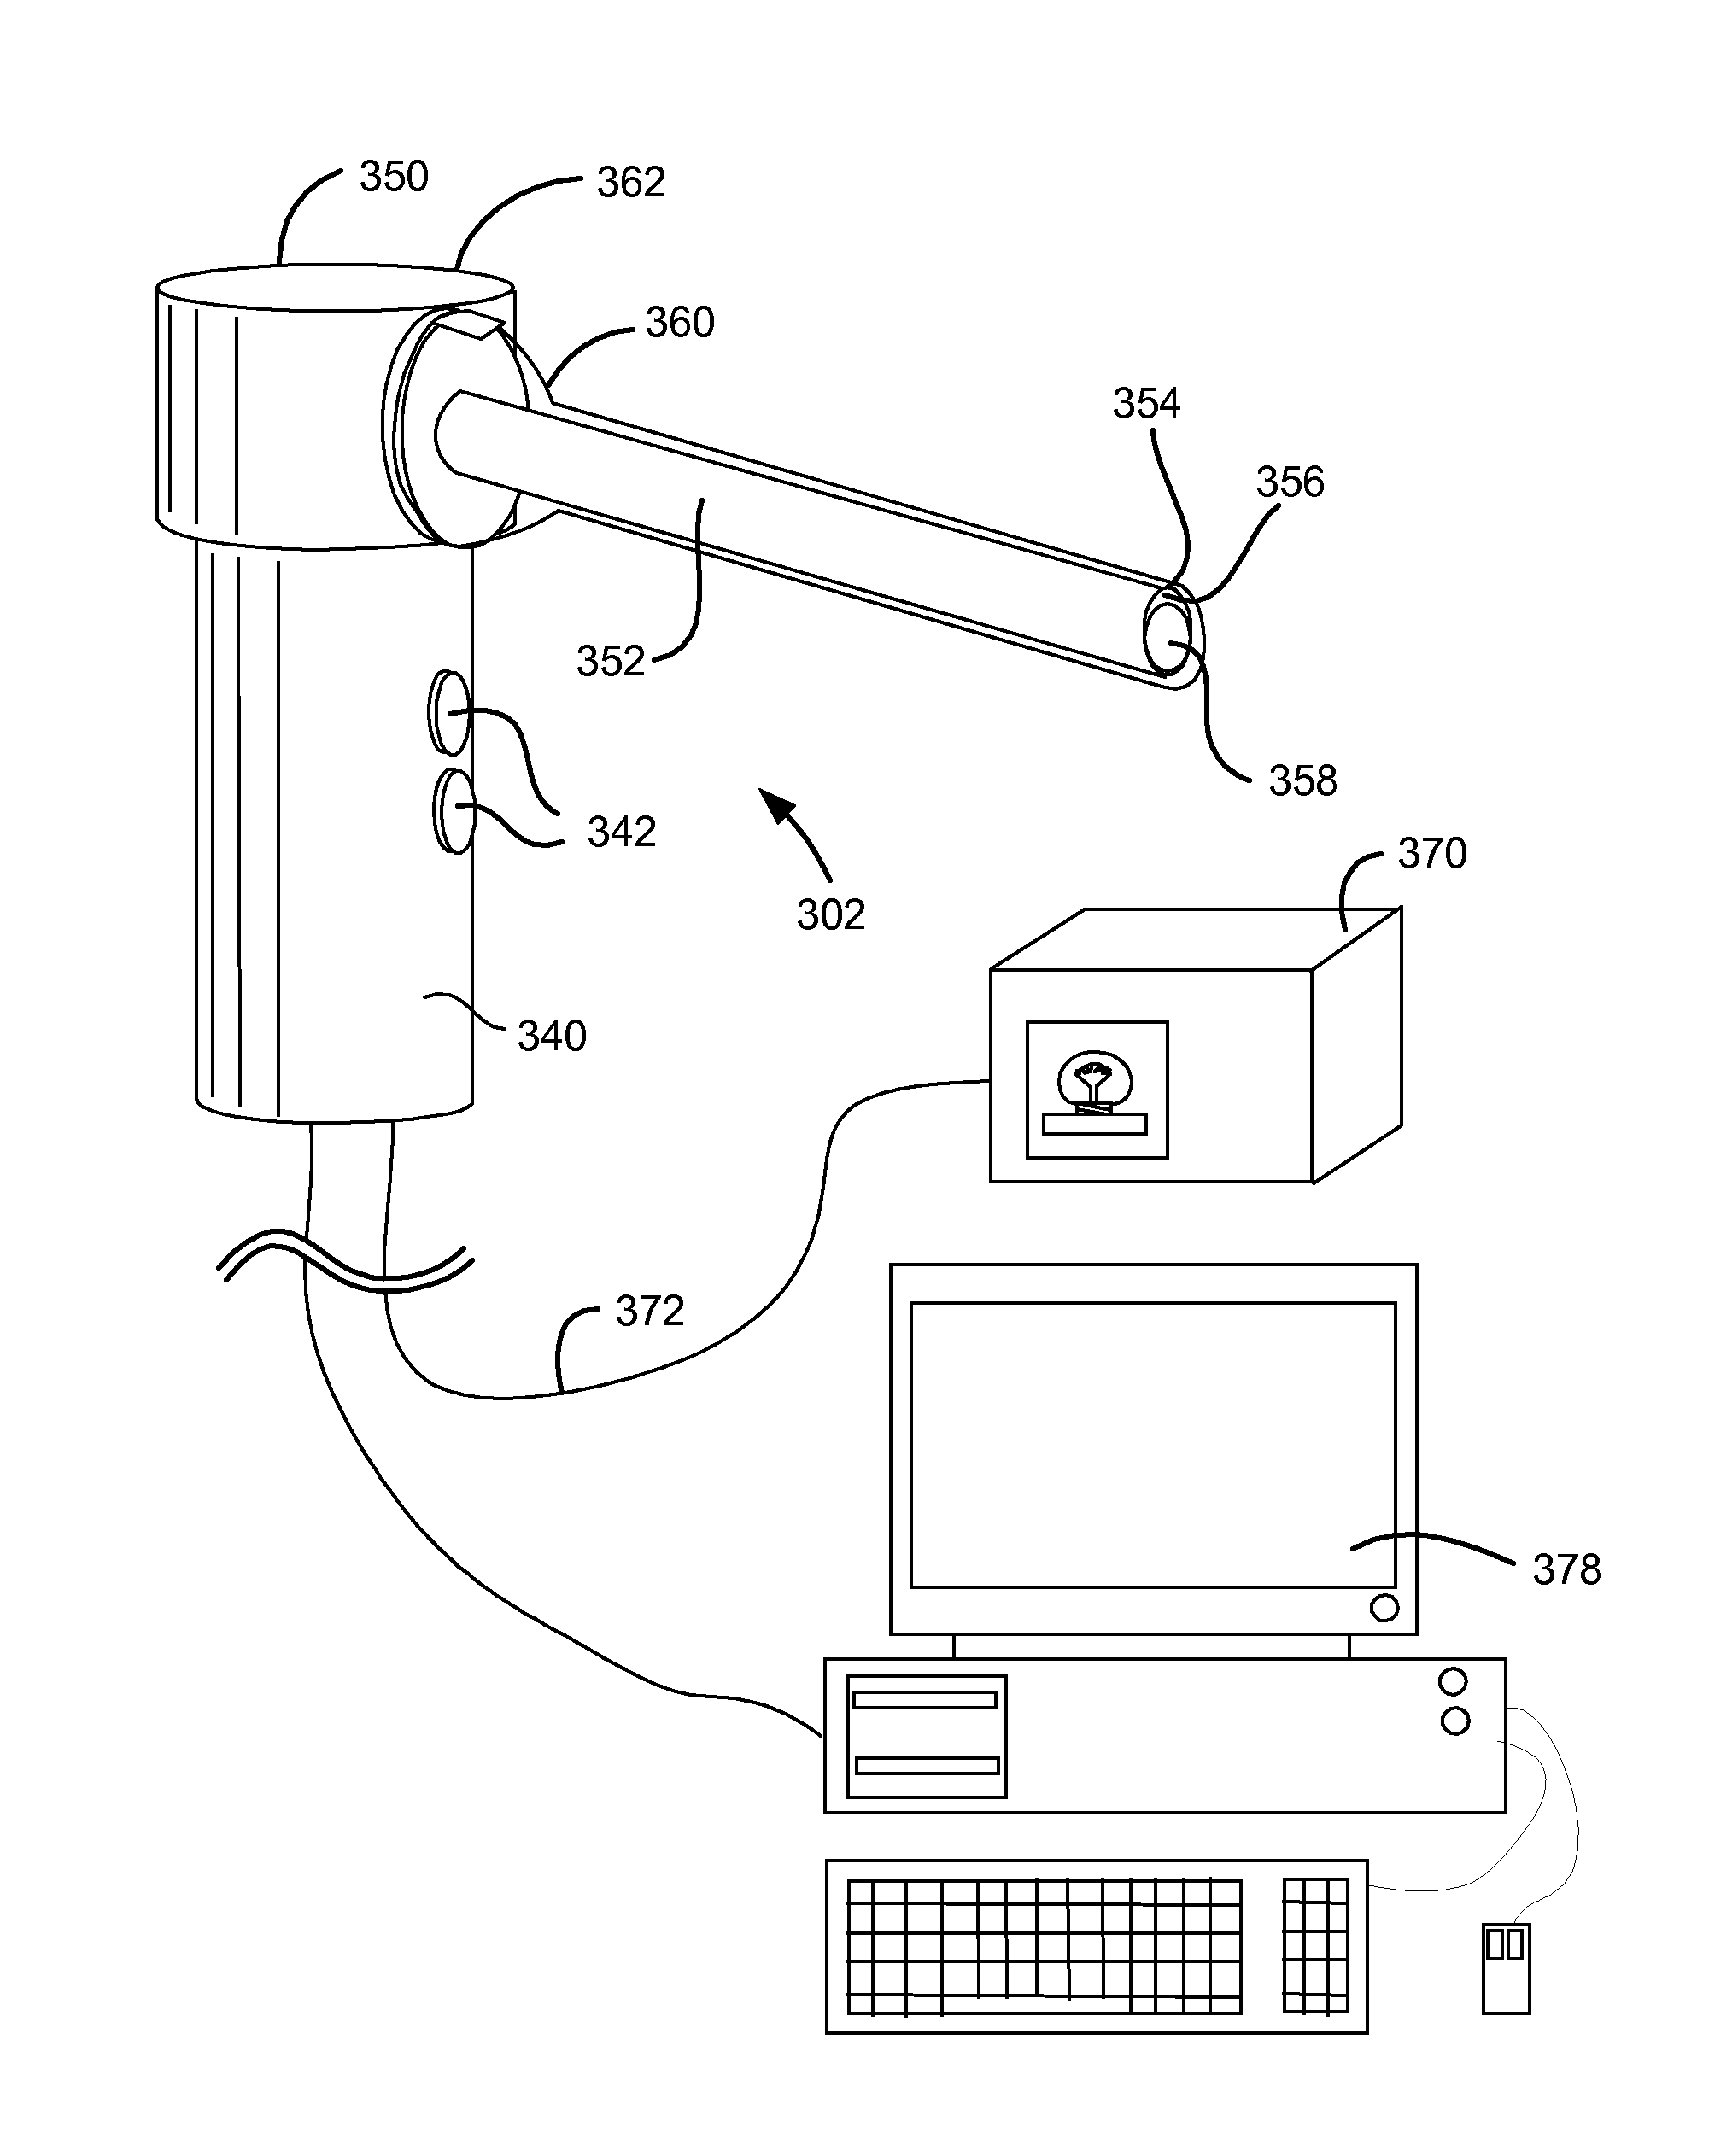 Methods and devices for assessment of pneumostoma function